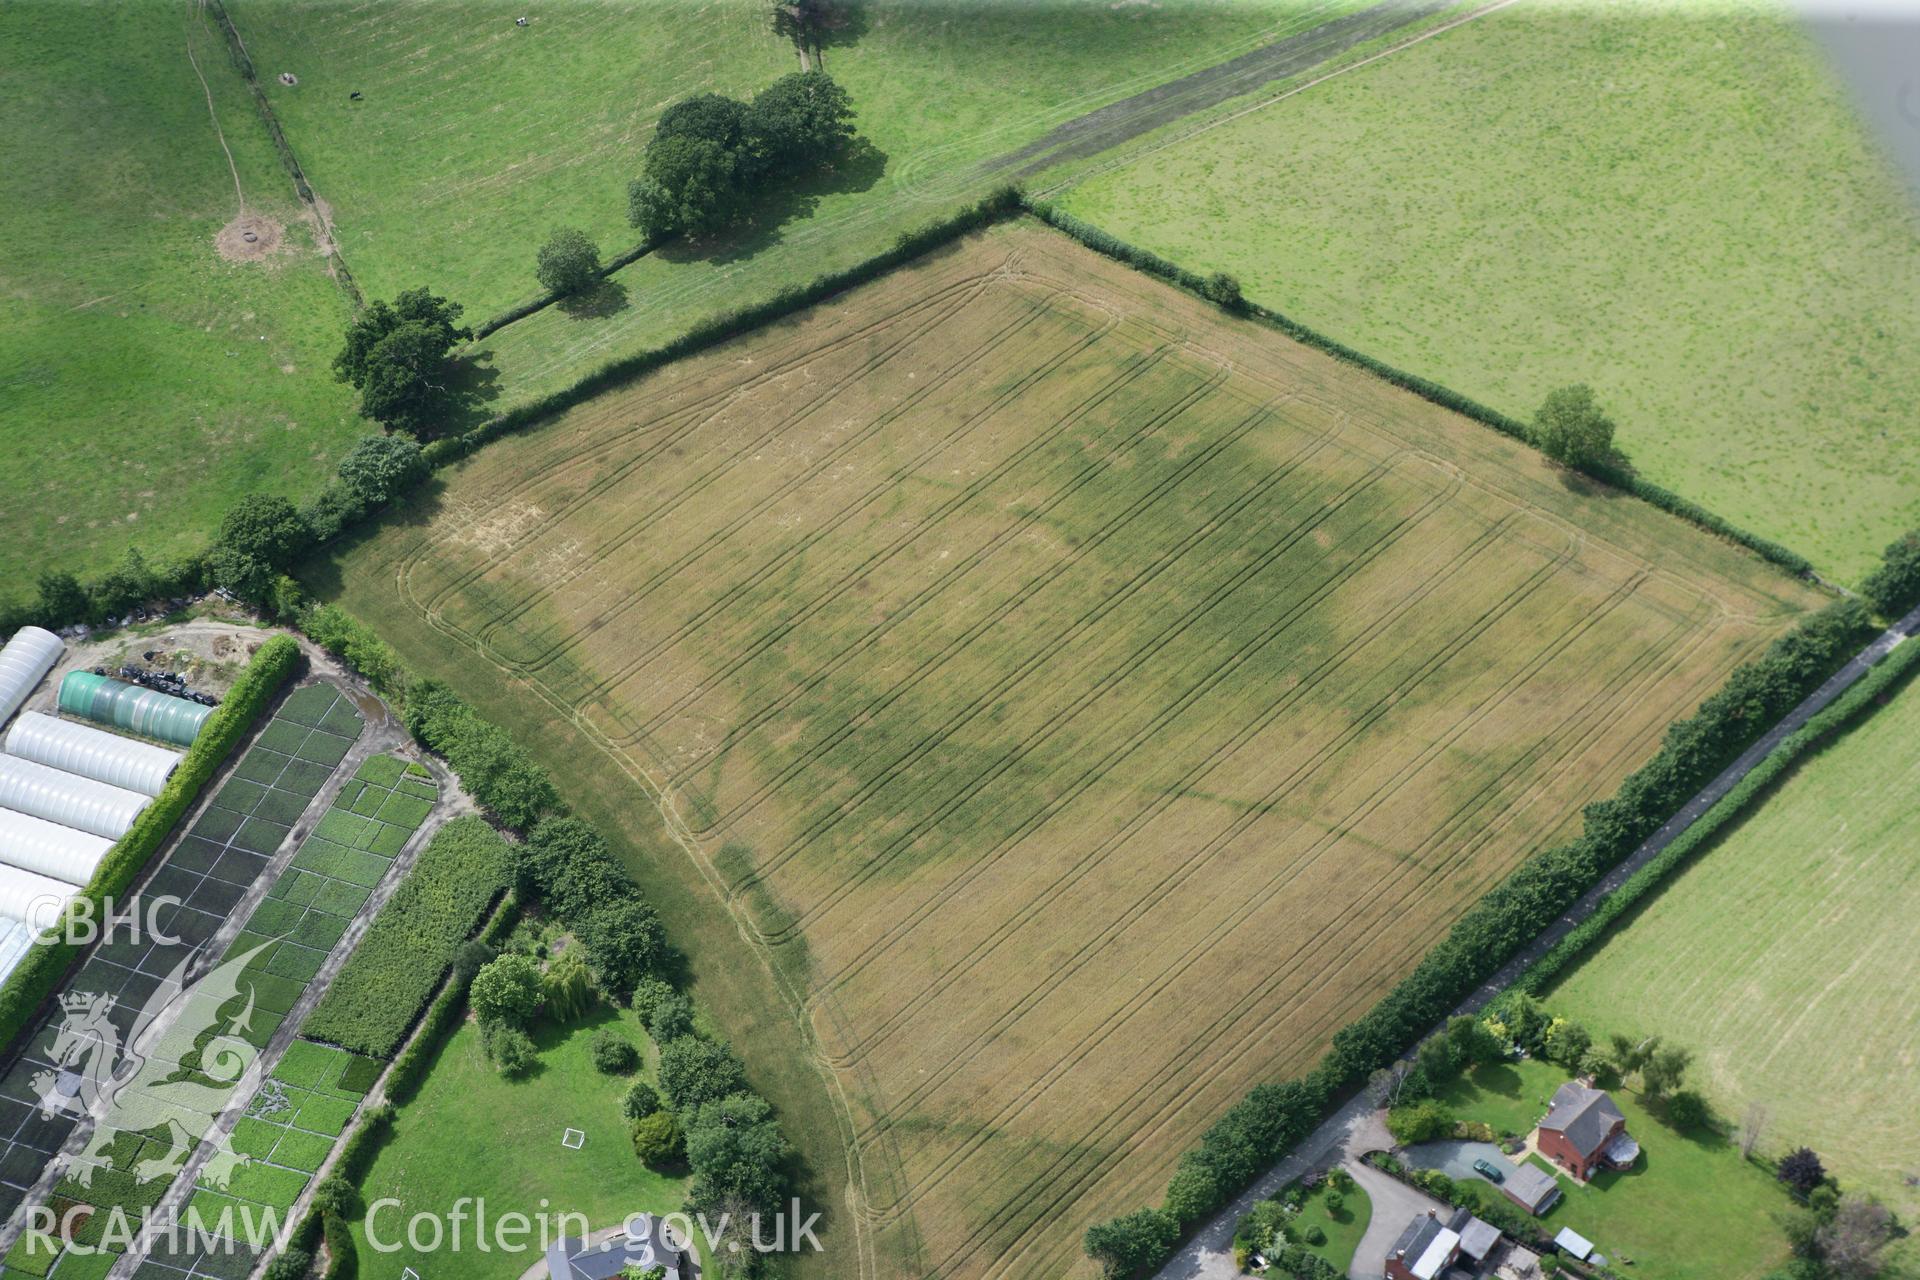 RCAHMW colour oblique photograph of Domgay Lane linear cropmarks. Taken by Toby Driver on 20/07/2011.